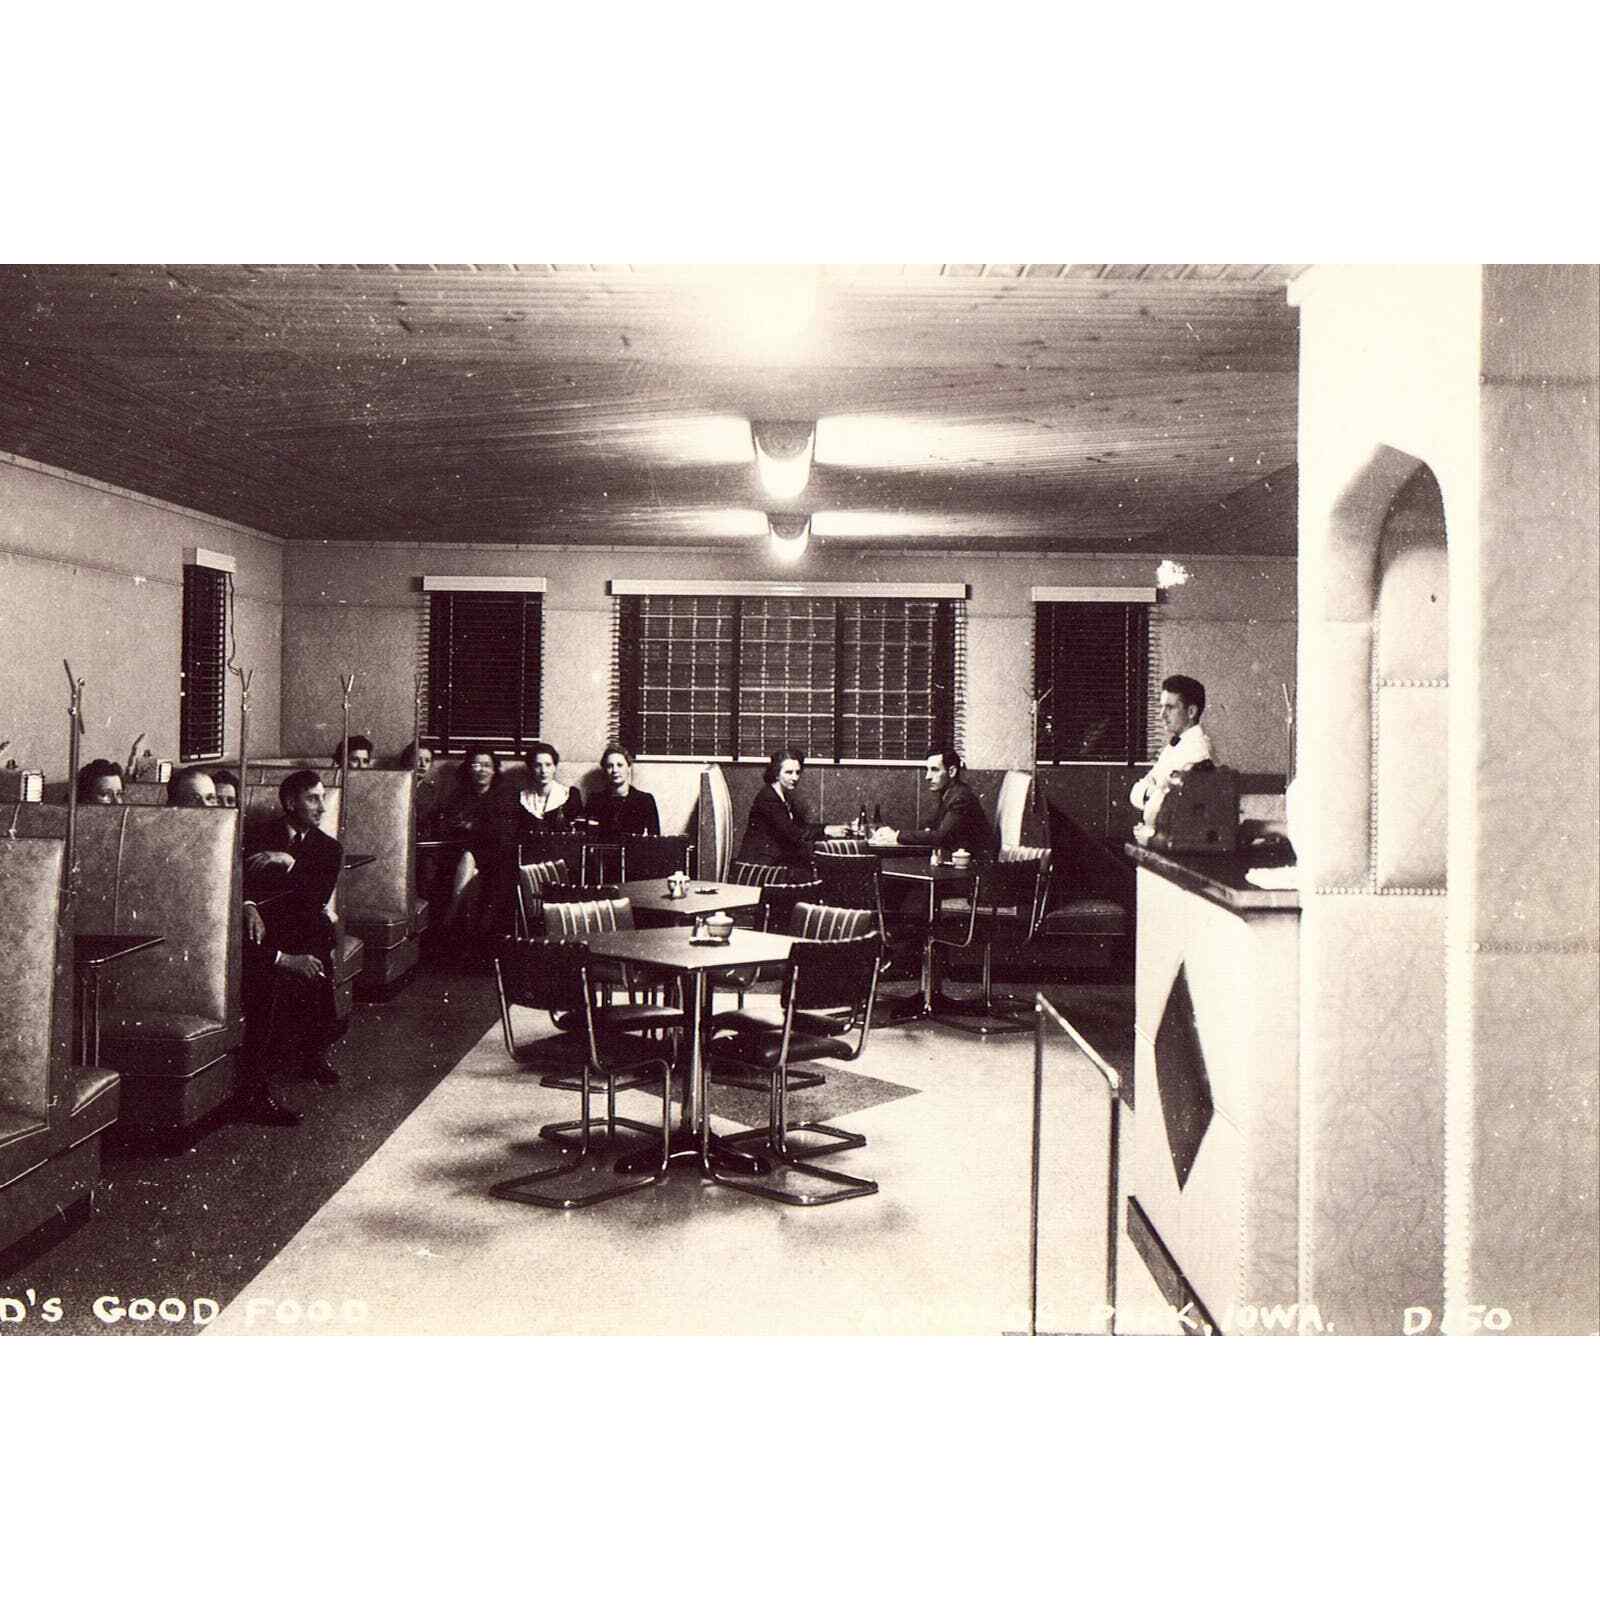 RPPC - Interior View of Red\'s Good Food in Arnolds Park,Iowa